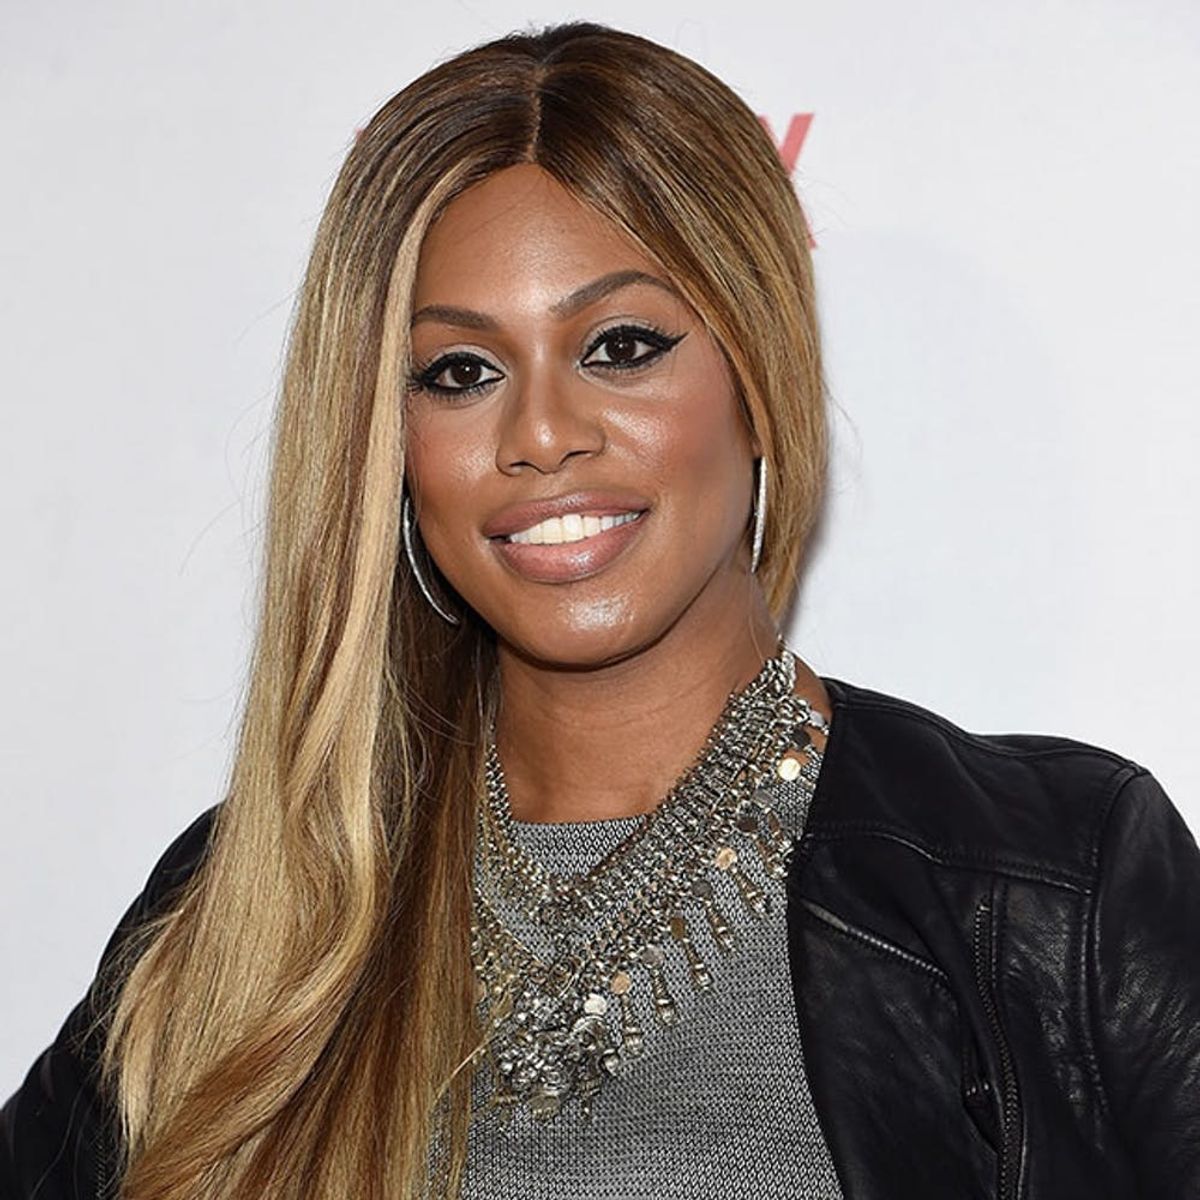 Laverne Cox Just Got Bangs and Will Make You Want Them Too